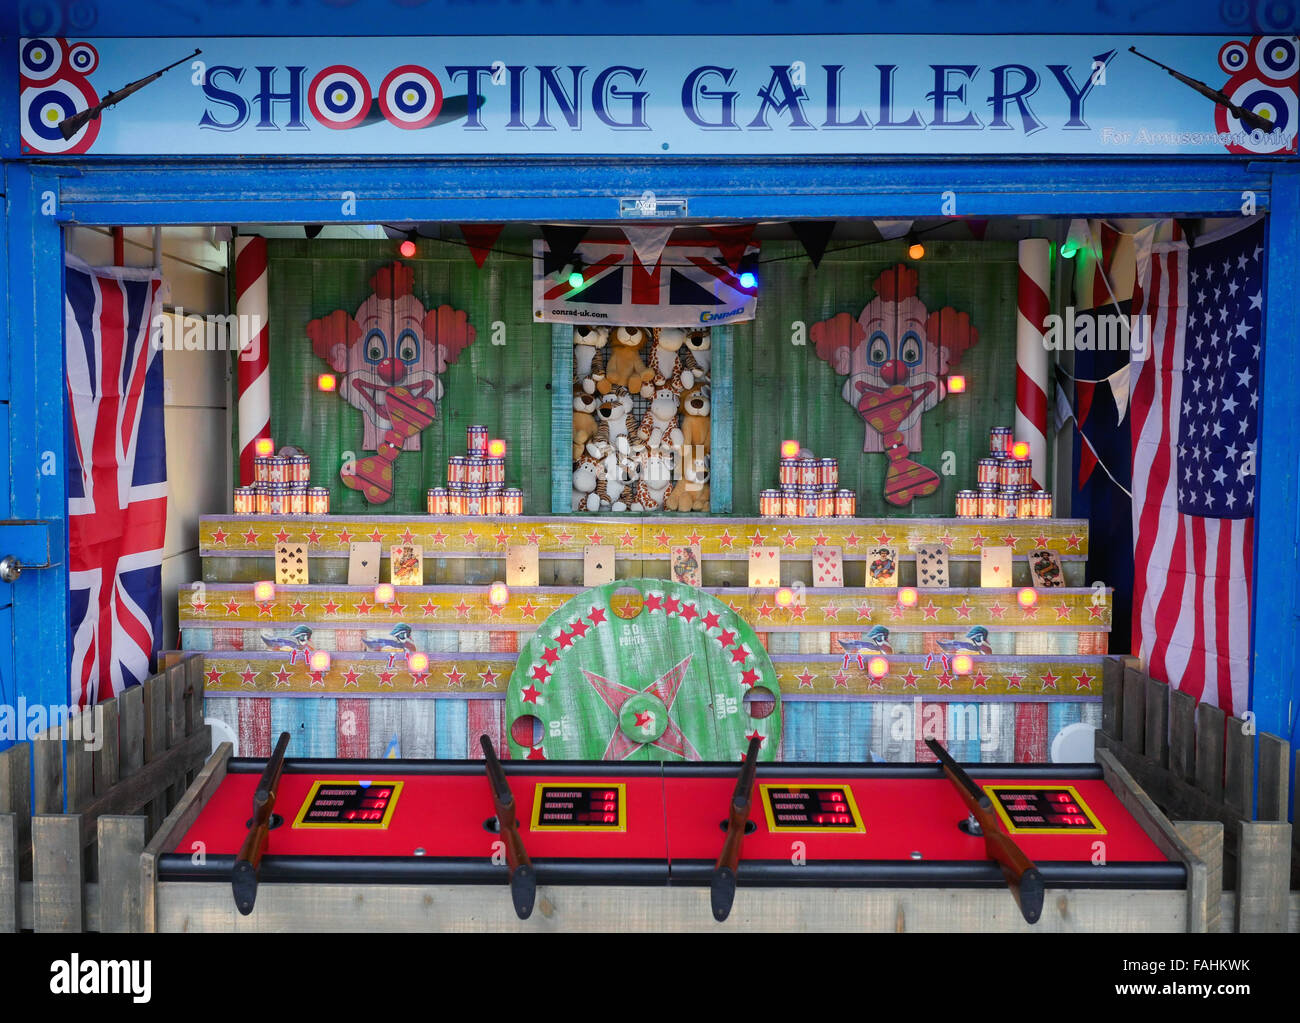 Shooting gallery at fairground Stock Photo